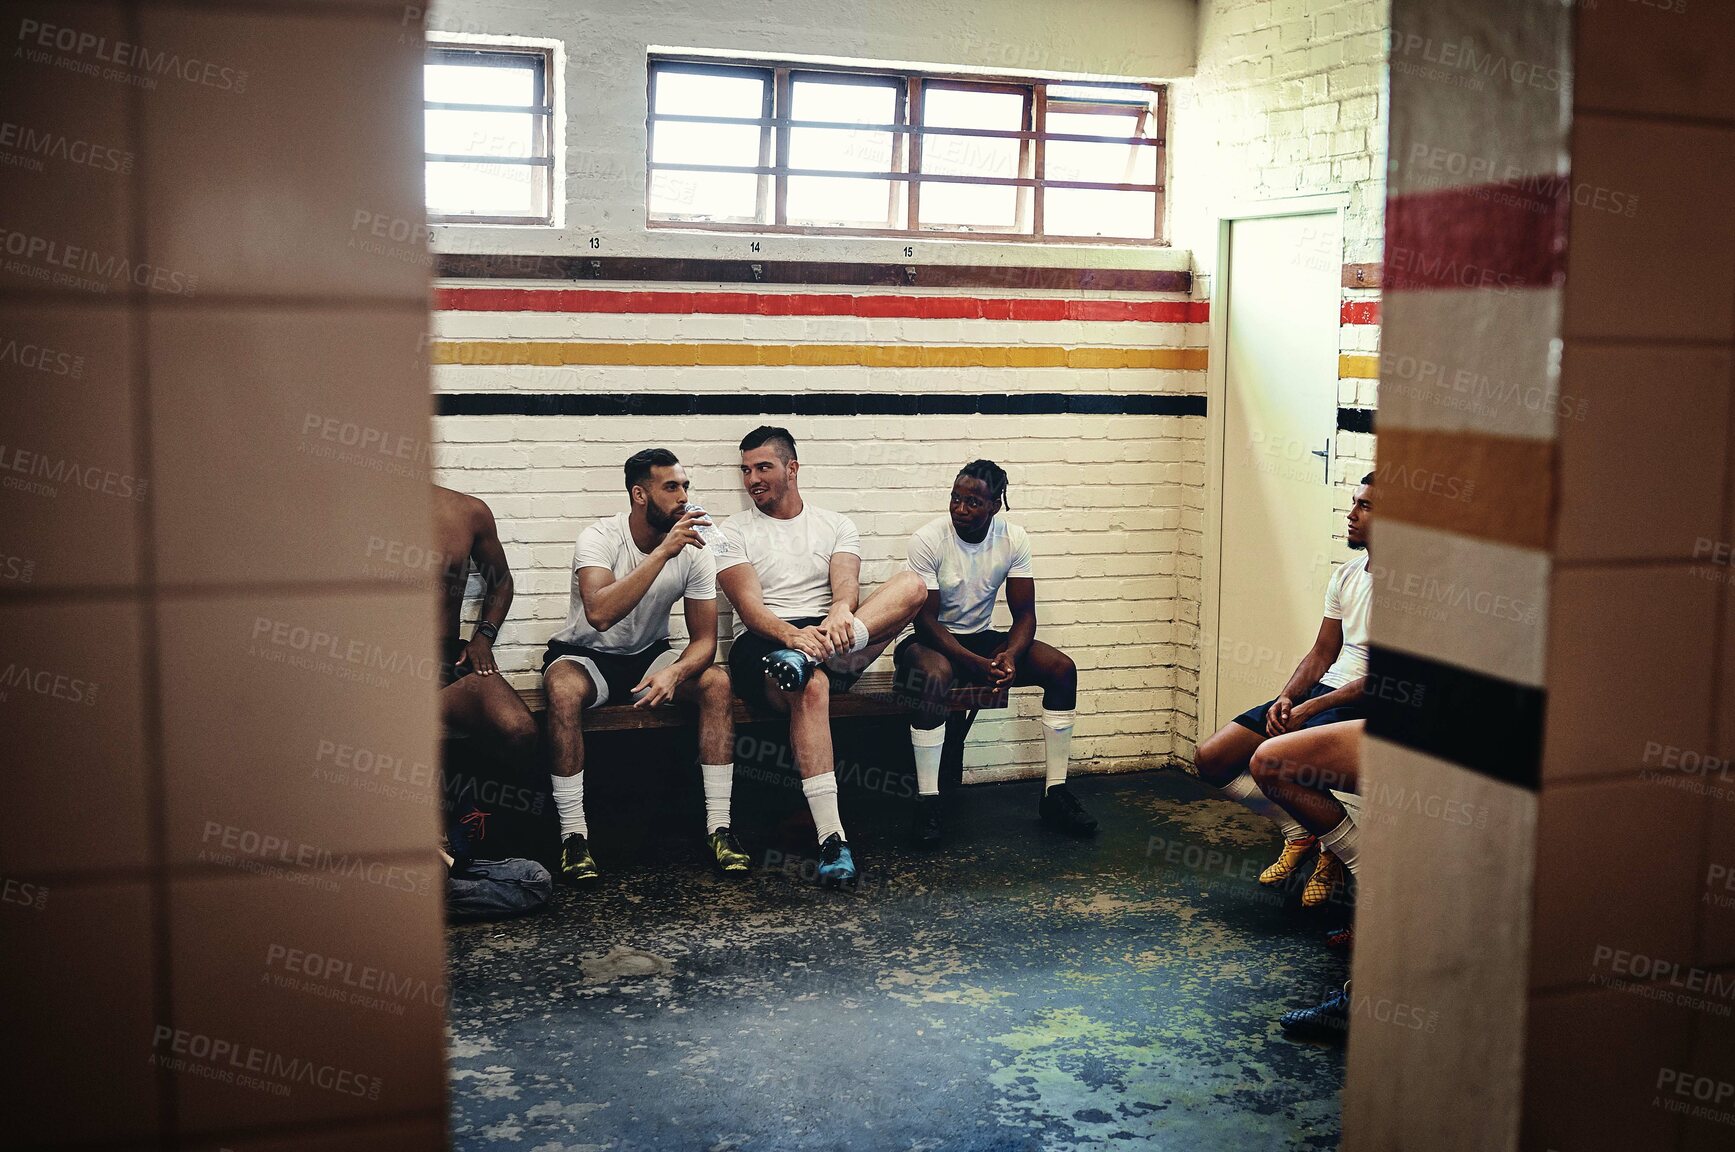 Buy stock photo Full length shot of a group of handsome young rugby players having a chat while sitting together in a locker room